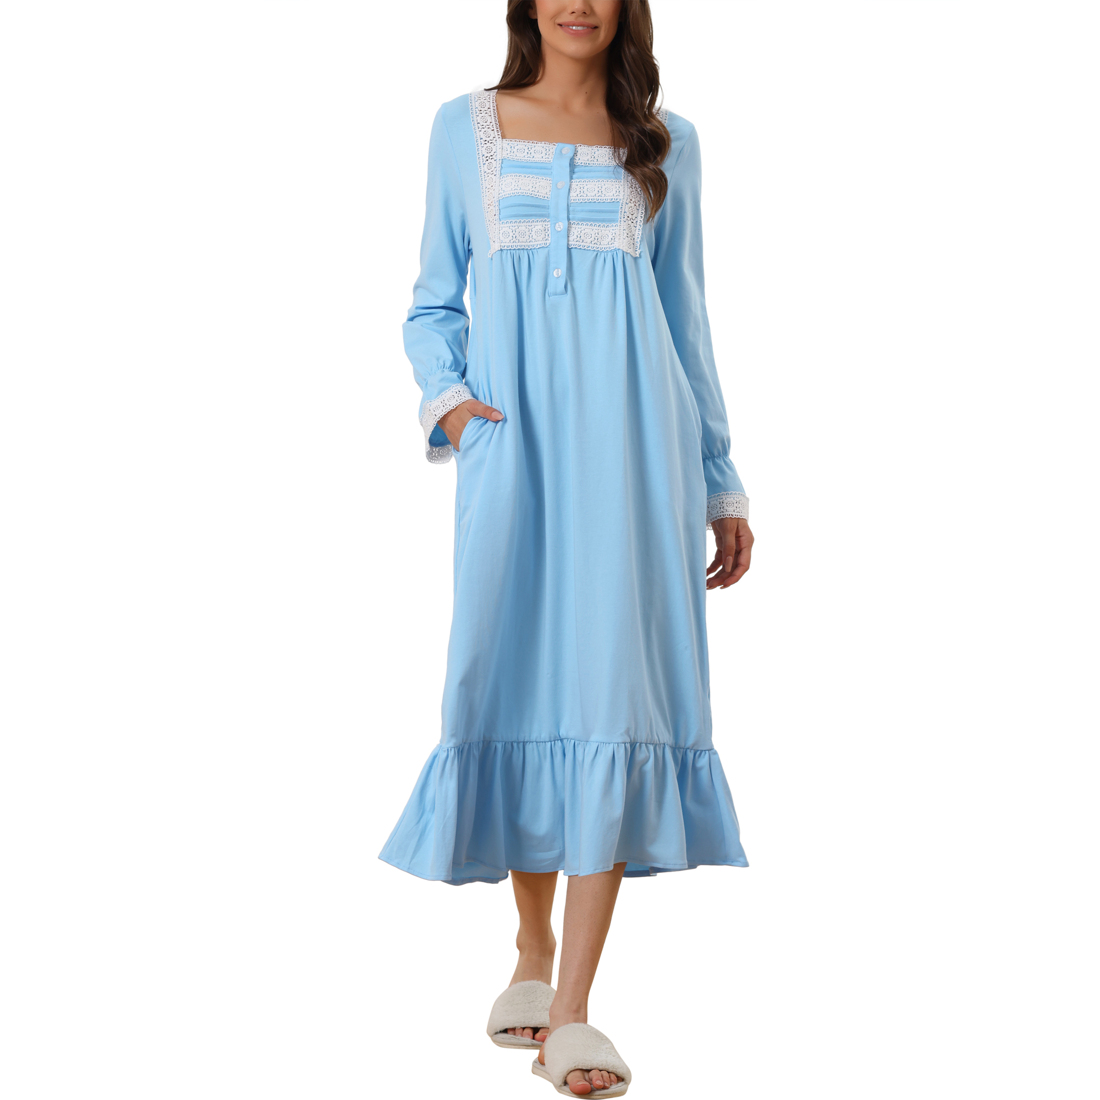 Unique Bargains Womens Victorian Nightgown Long Sleeve Ruffle Night Gown Sleepwear with Pockets